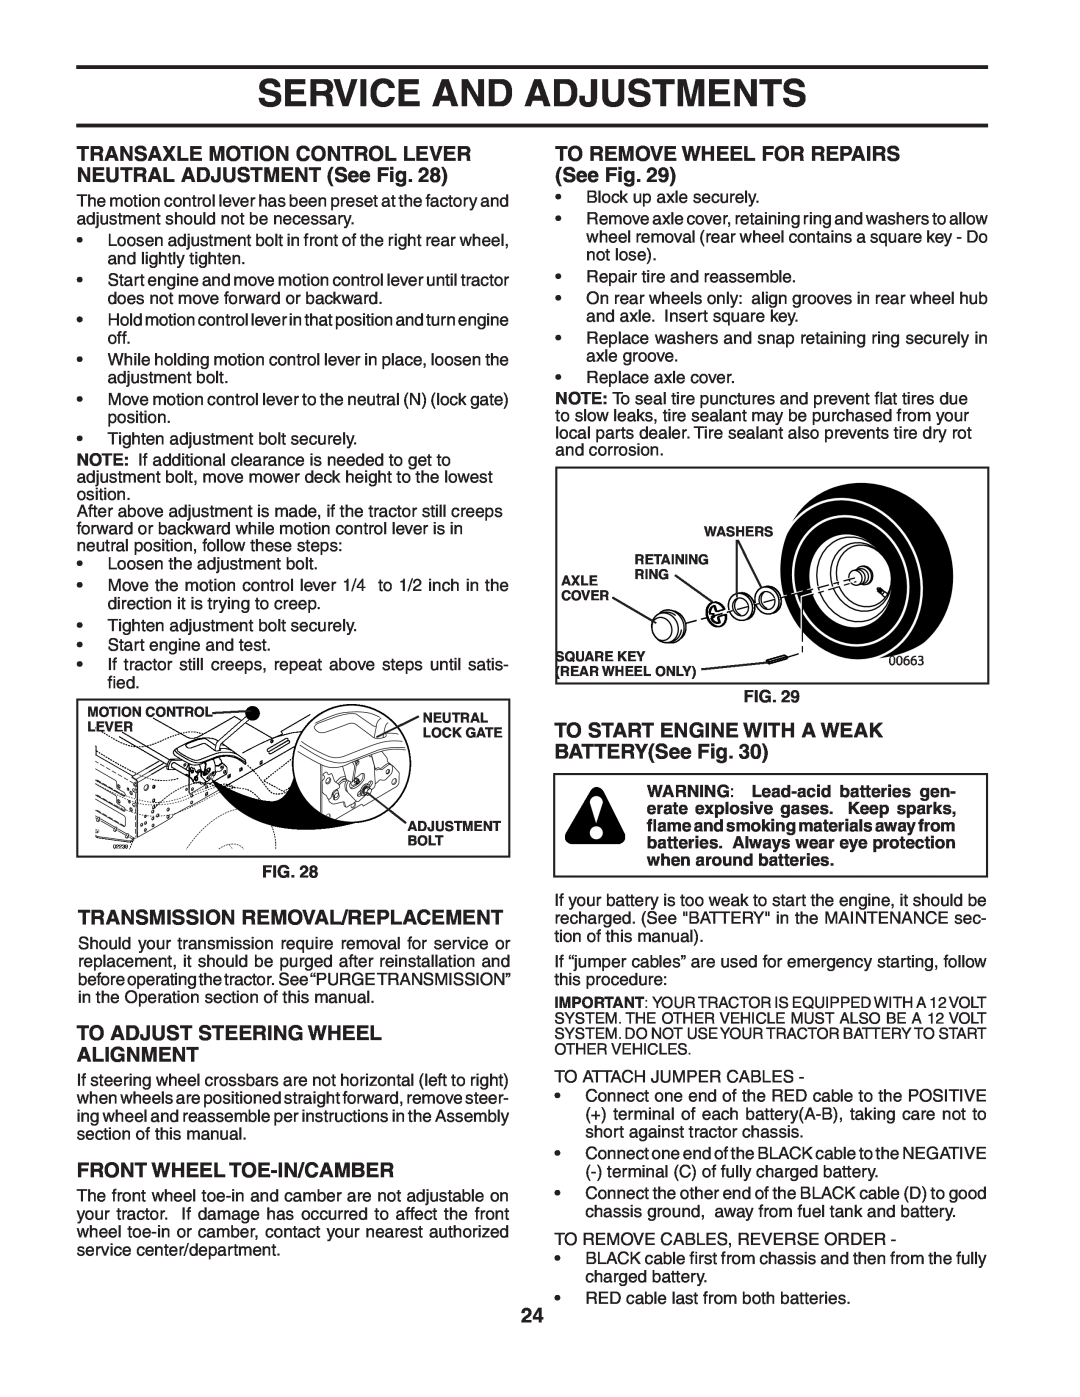 Husqvarna YTH2548 TO REMOVE WHEEL FOR REPAIRS See Fig, Transmission Removal/Replacement, Front Wheel Toe-In/Camber 